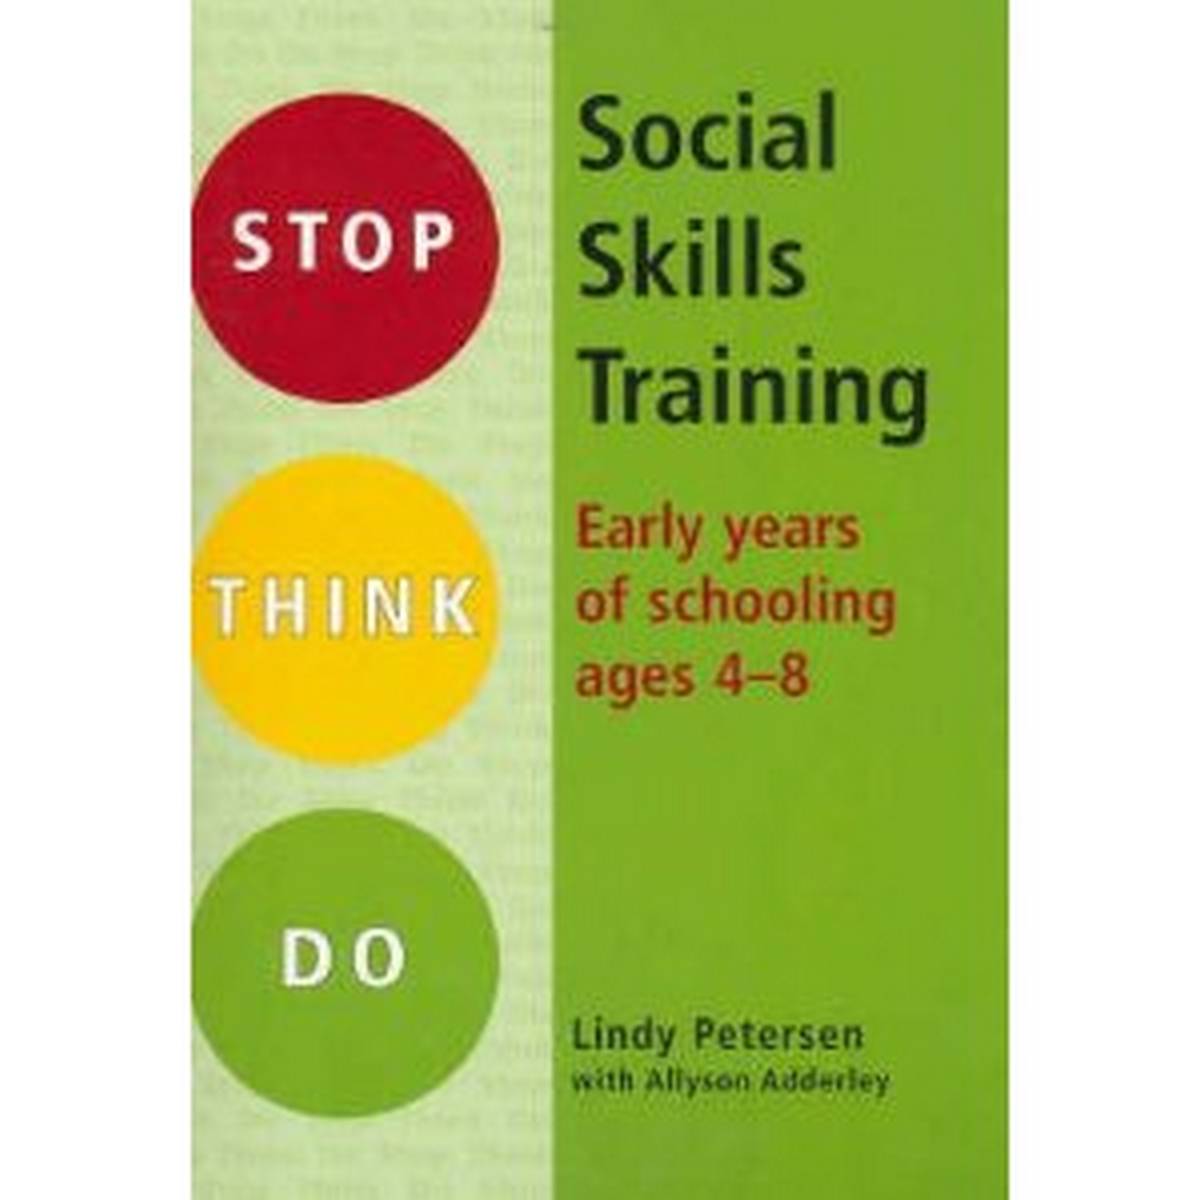 Stop Think Do: Social Skills Training for ages 4 - 8